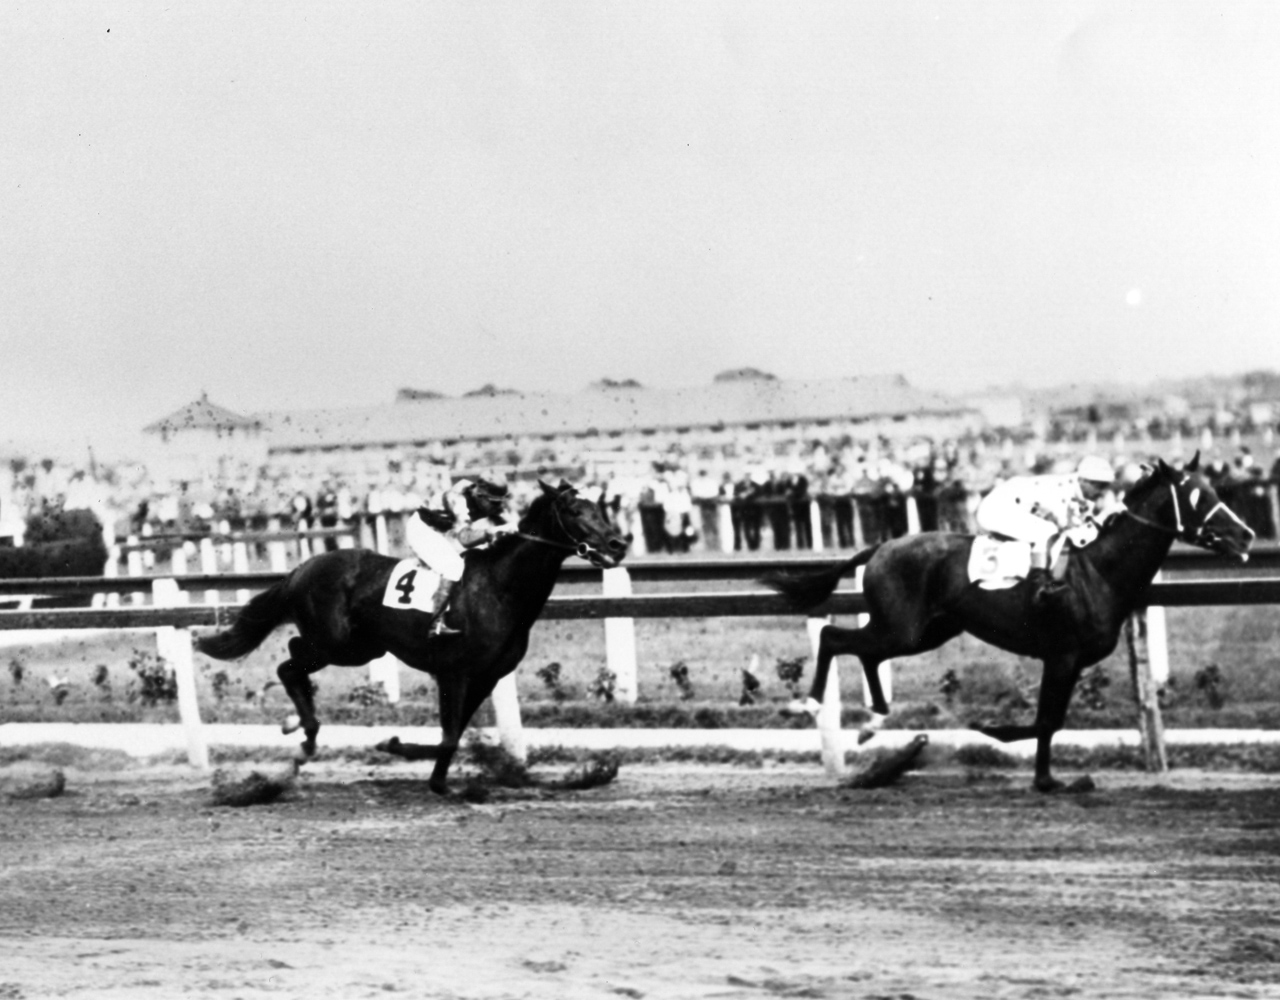 Gallant Fox (Earl Sande up) winning the 1930 Dwyer Stakes at Aqueduct, his first race after becoming a Triple Crown winner (Keeneland Library Cook Collection/Museum Collection)